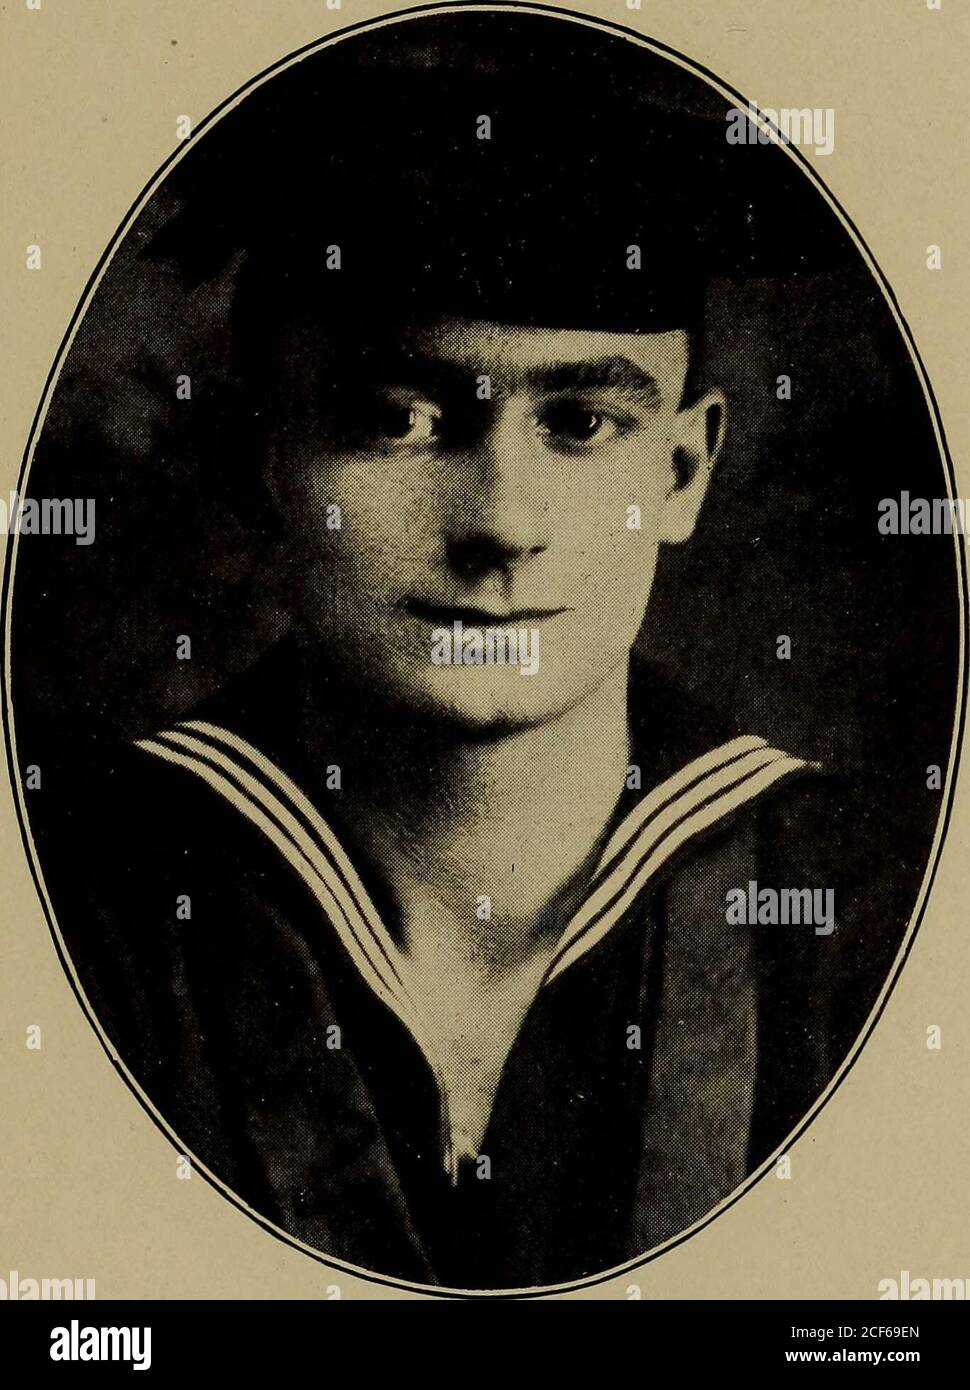 . Lansdowne school and the world war. Ernest La Place McKenna enlisted in the Navy April 20,1918. He was encamped at Wissahickon Barracks, Cape May,N. J.; Pier 19, Philadelphia; Philadelphia Navy Yard; andCharleston Navy Yard, S. C. On July 26, 1918, he received therating of quartermaster, 3rd class. He was discharged February6, 1919. Ernest voices the sentiment of many others when hesays: *I am glad I had the experience, but I would not want togo through it again. 114. Horace Walton McKissick enlisted in the Navy, Novem-ber 14, 1917. He was encamped at Wissahickon Barracks, CapeMay; at Lewes, Stock Photo